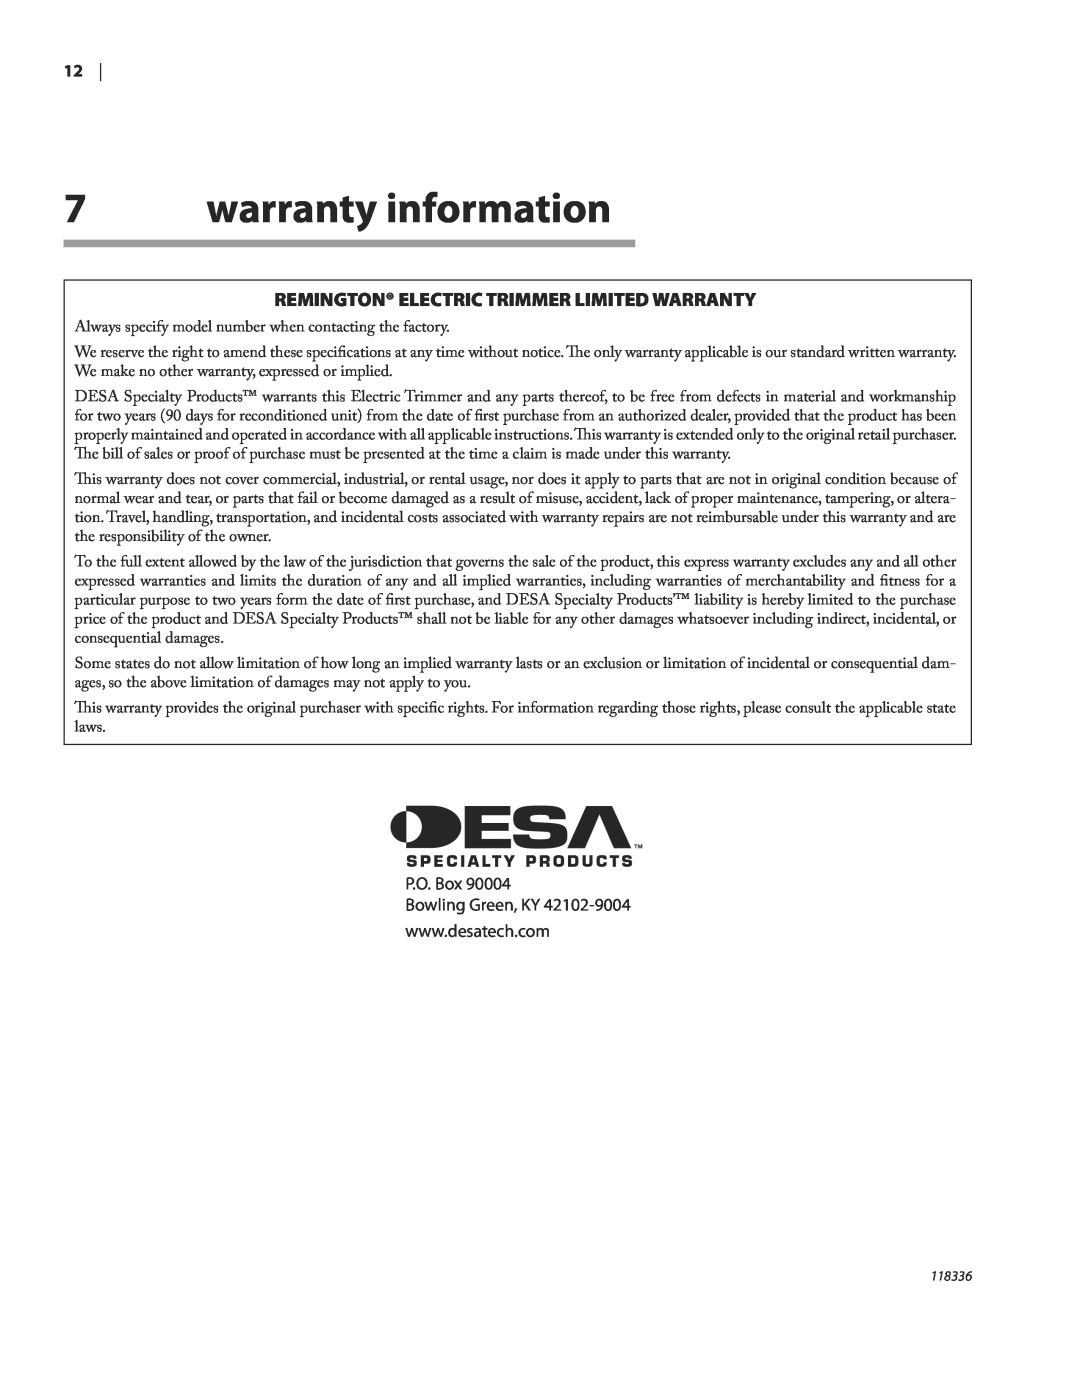 Remington ST3010A owner manual warranty information, Remington Electric Trimmer Limited Warranty 